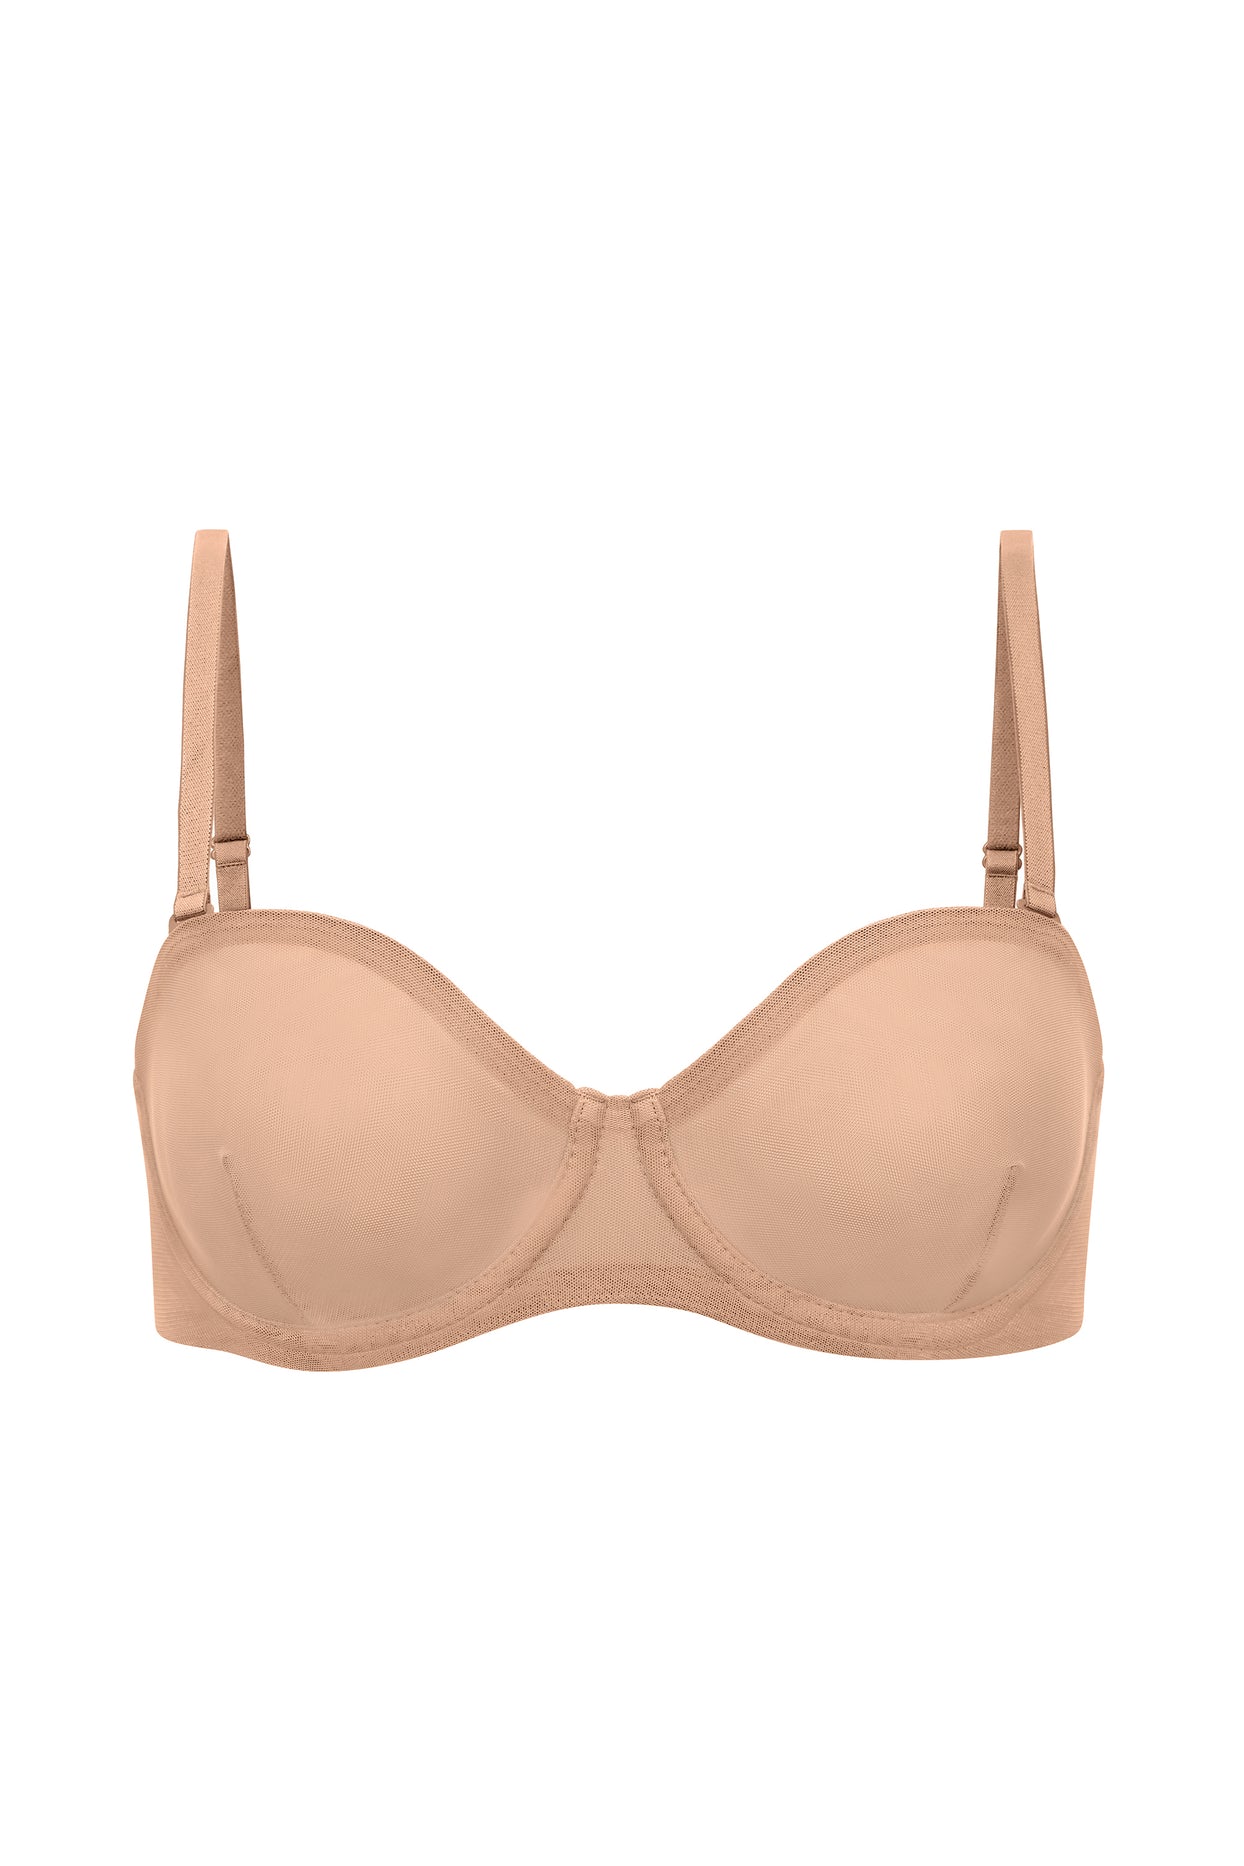 Intimates Soft Mesh Strapless Bra in Warm Peach | Oh Polly